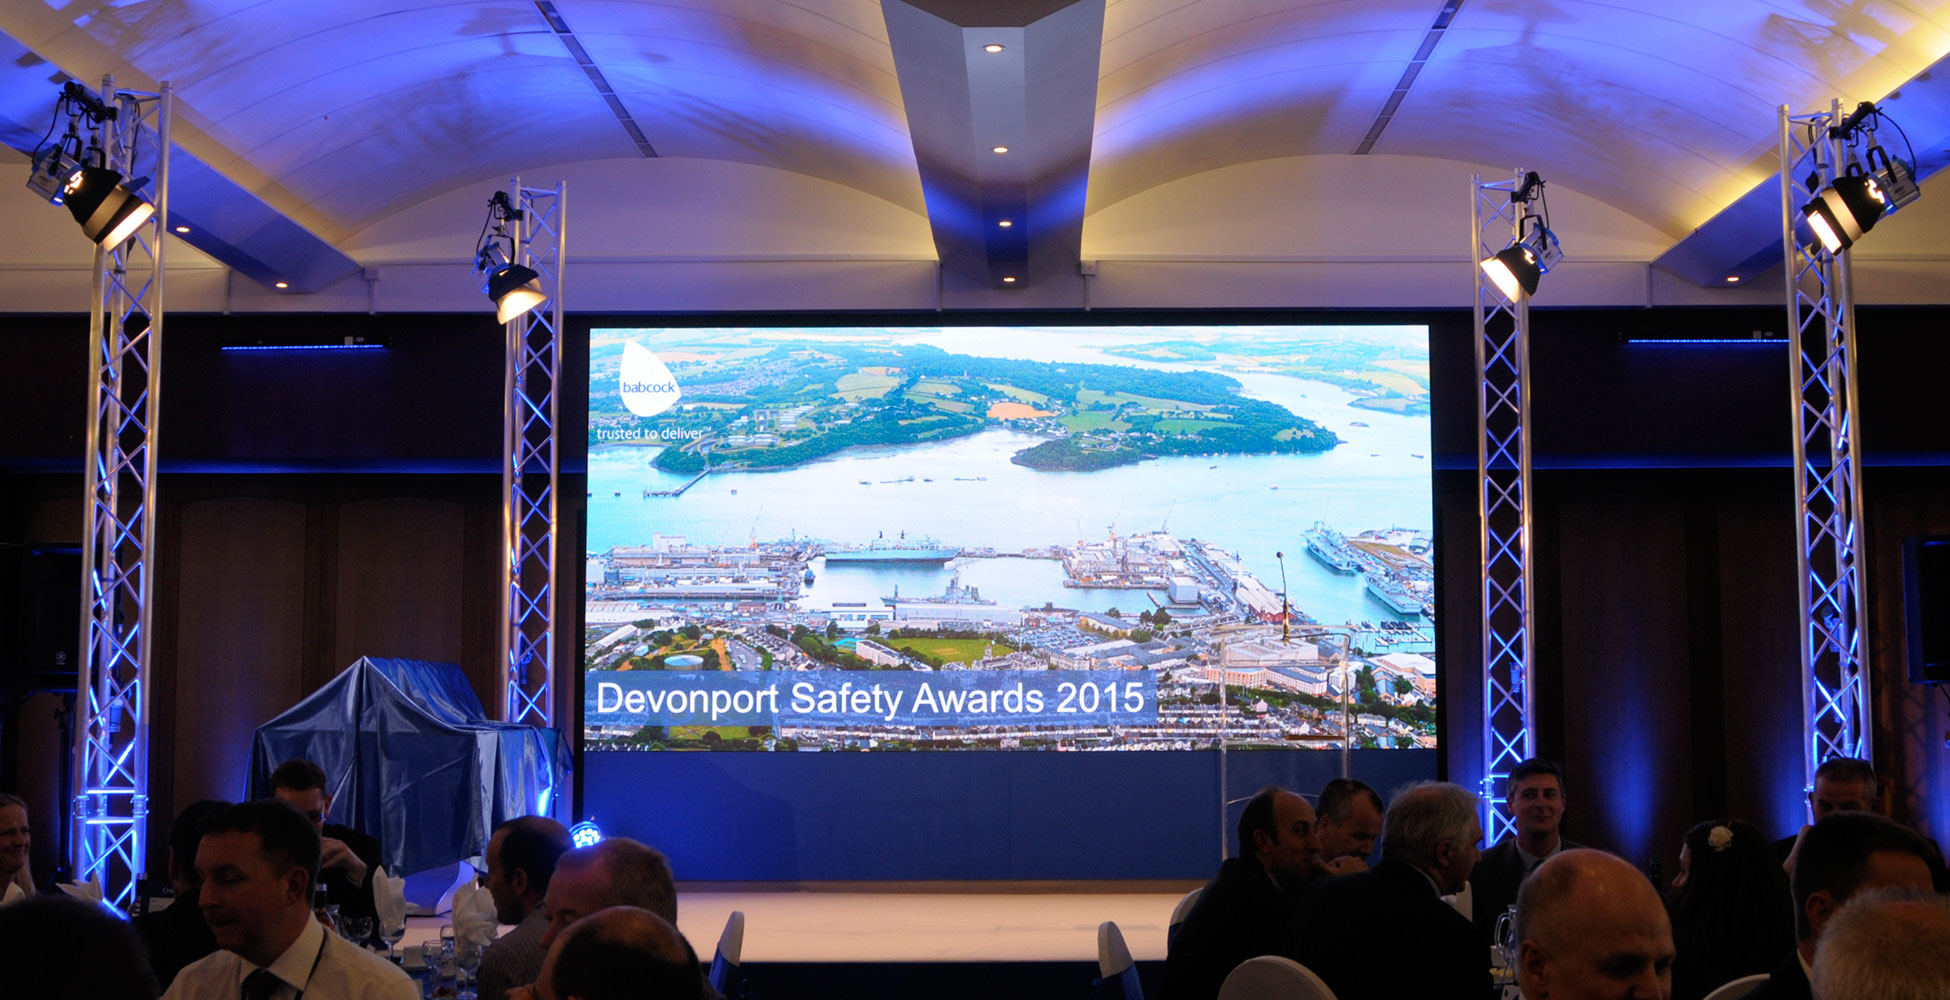 PL1 Events - Conference Events Plymouth Devon South West UK